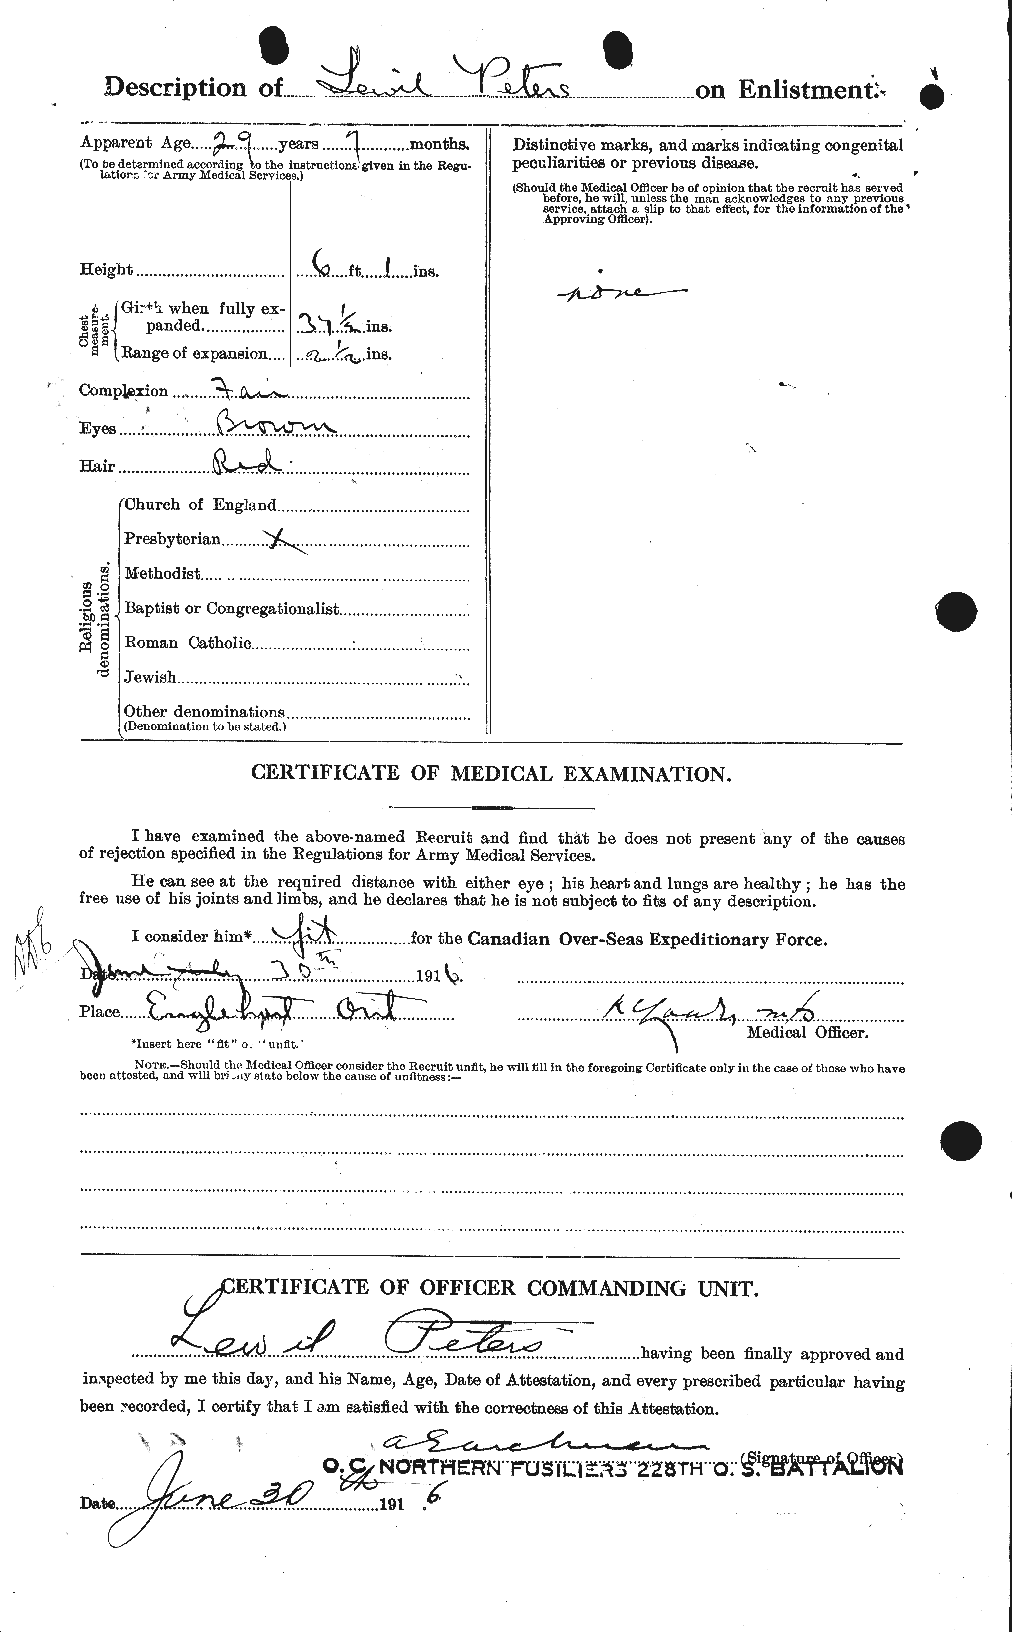 Personnel Records of the First World War - CEF 575578b